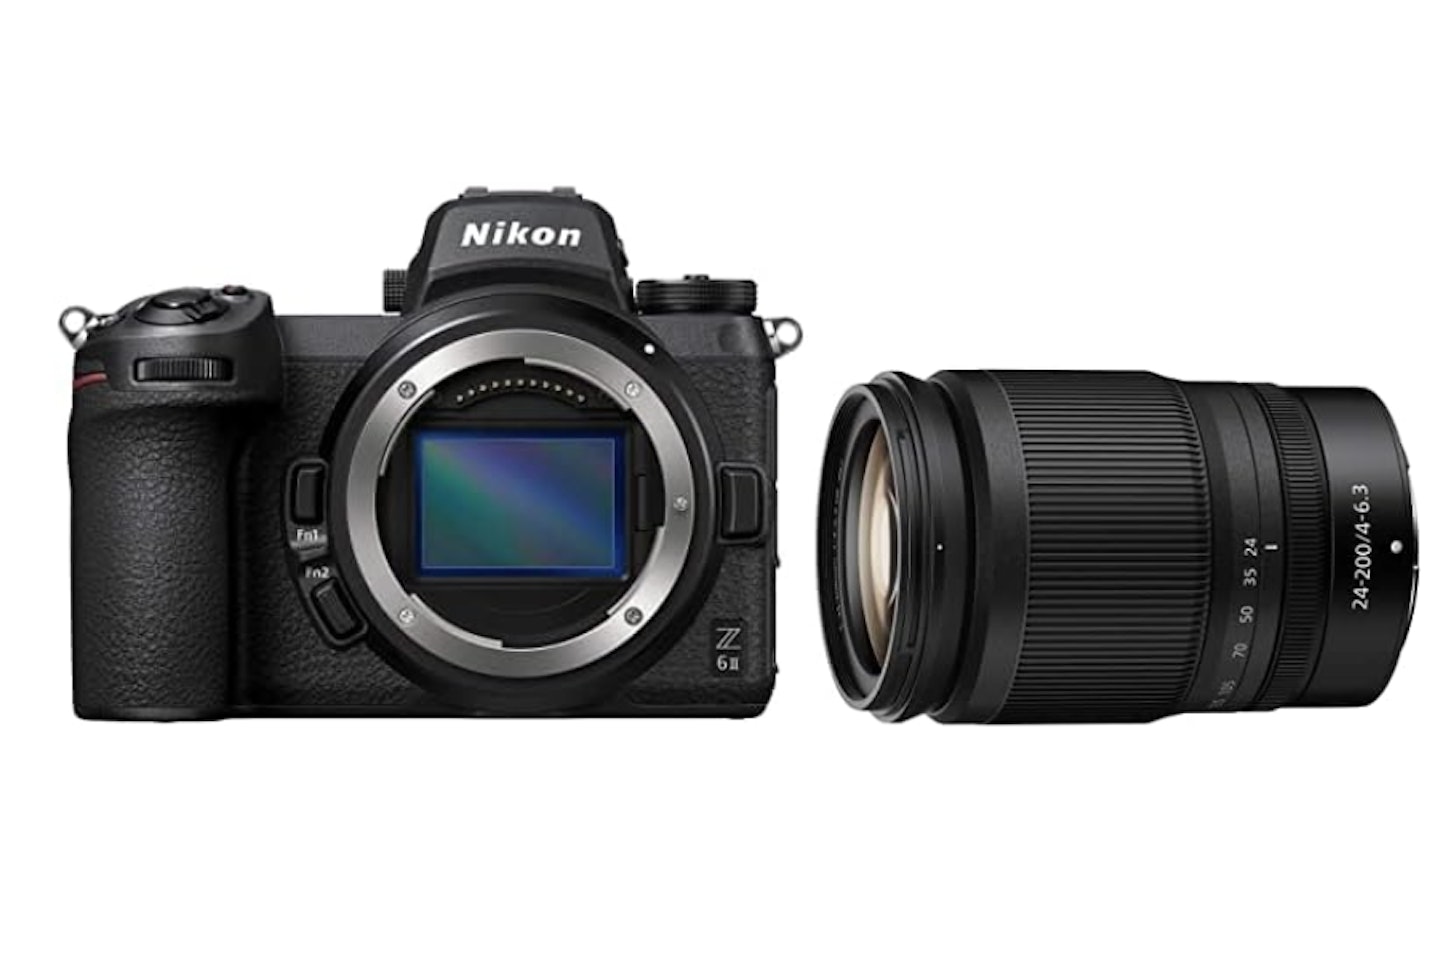 Nikon Z6 II Body Mirrorless Camera and NIKKOR Z 24-200mm lens - one of the best mirrorless cameras